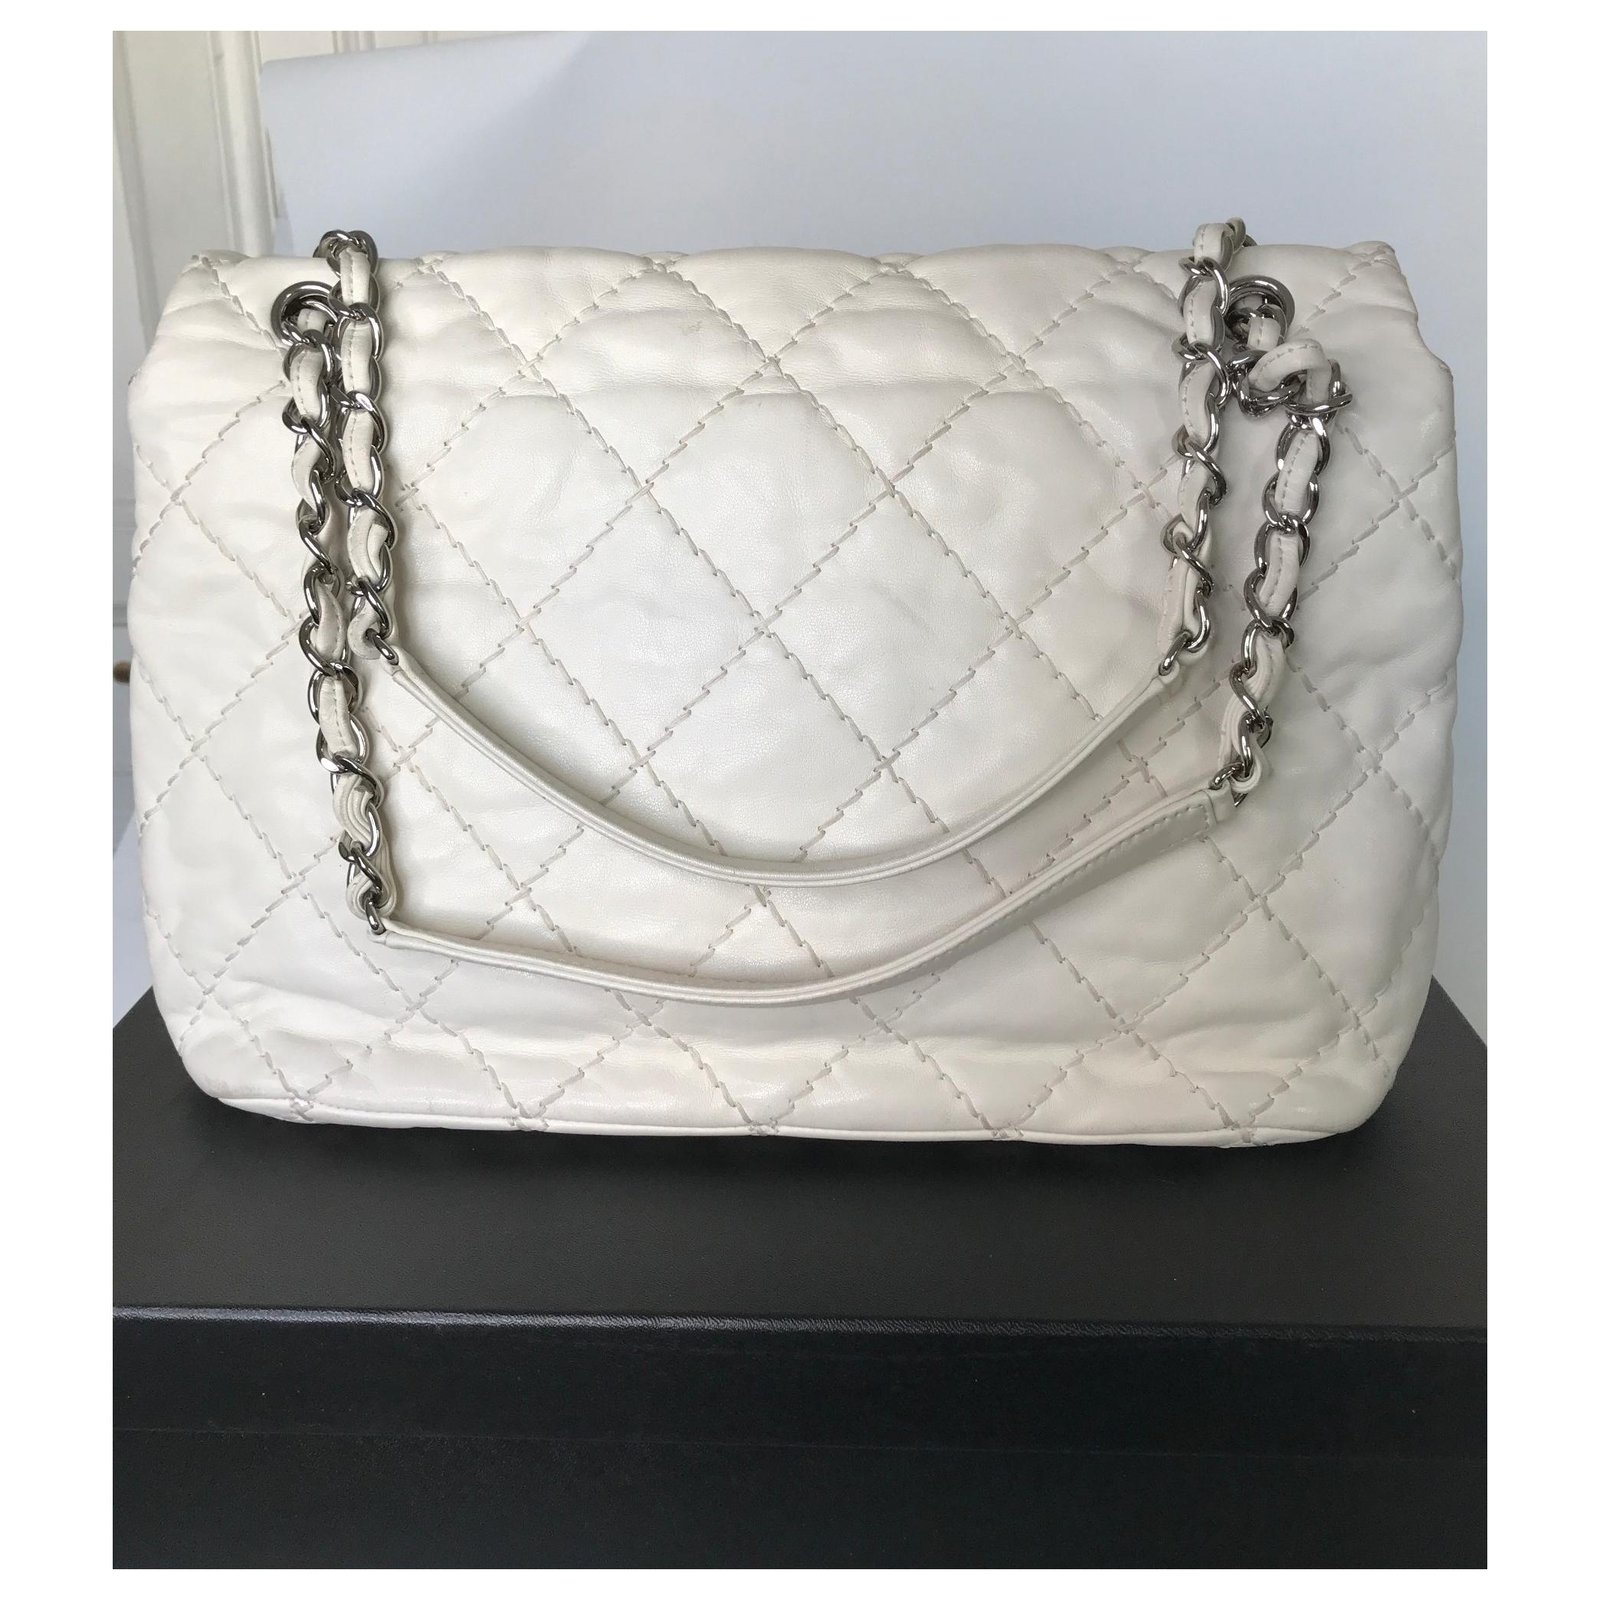 Maxi Timeless Flap Bag with Chanel Box